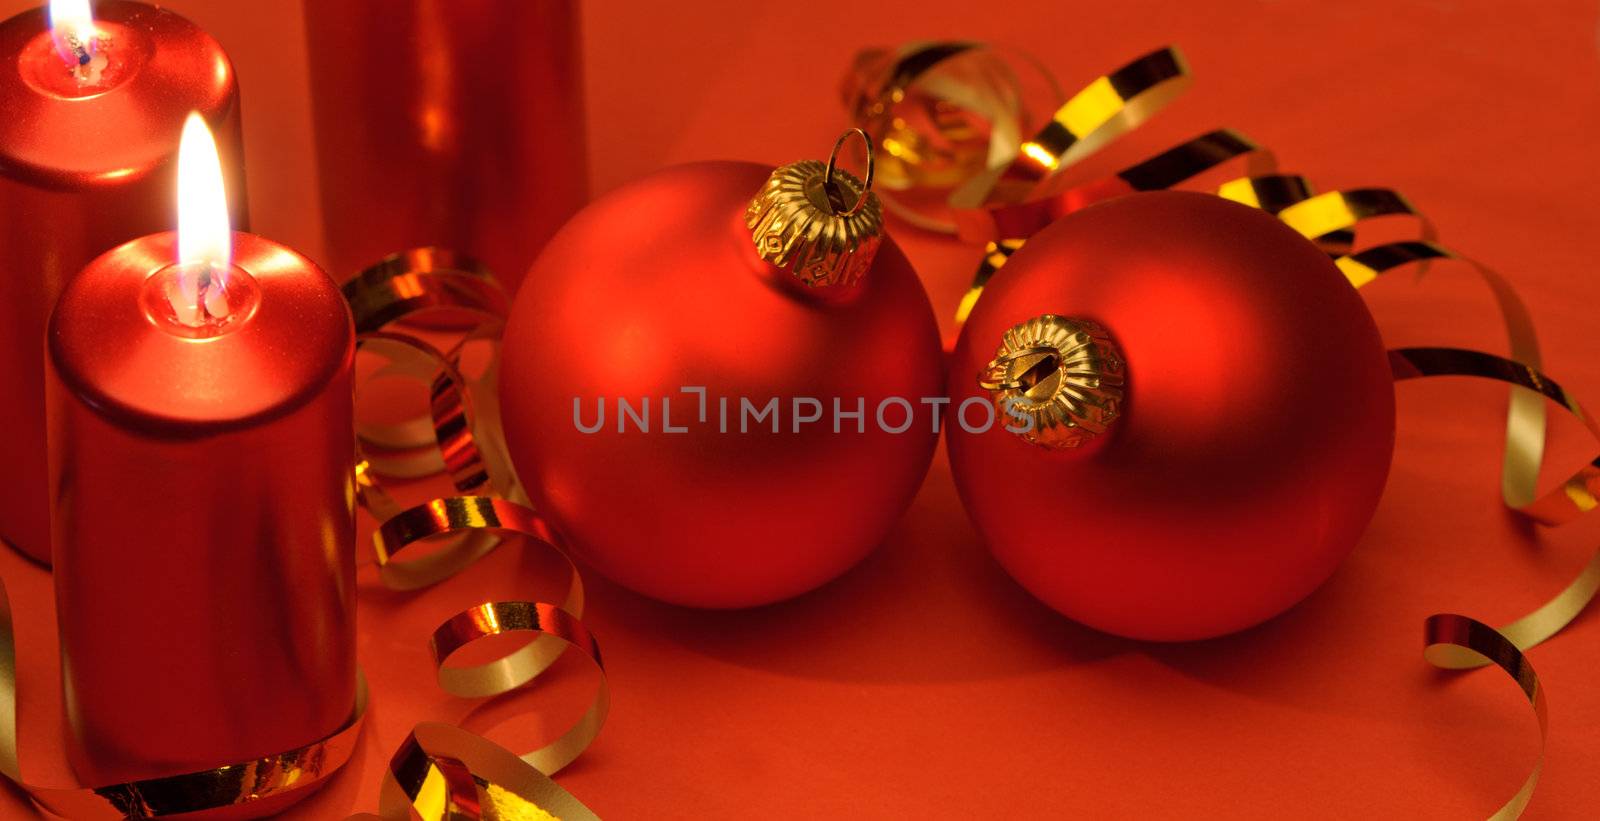 Christmas candles by galdzer